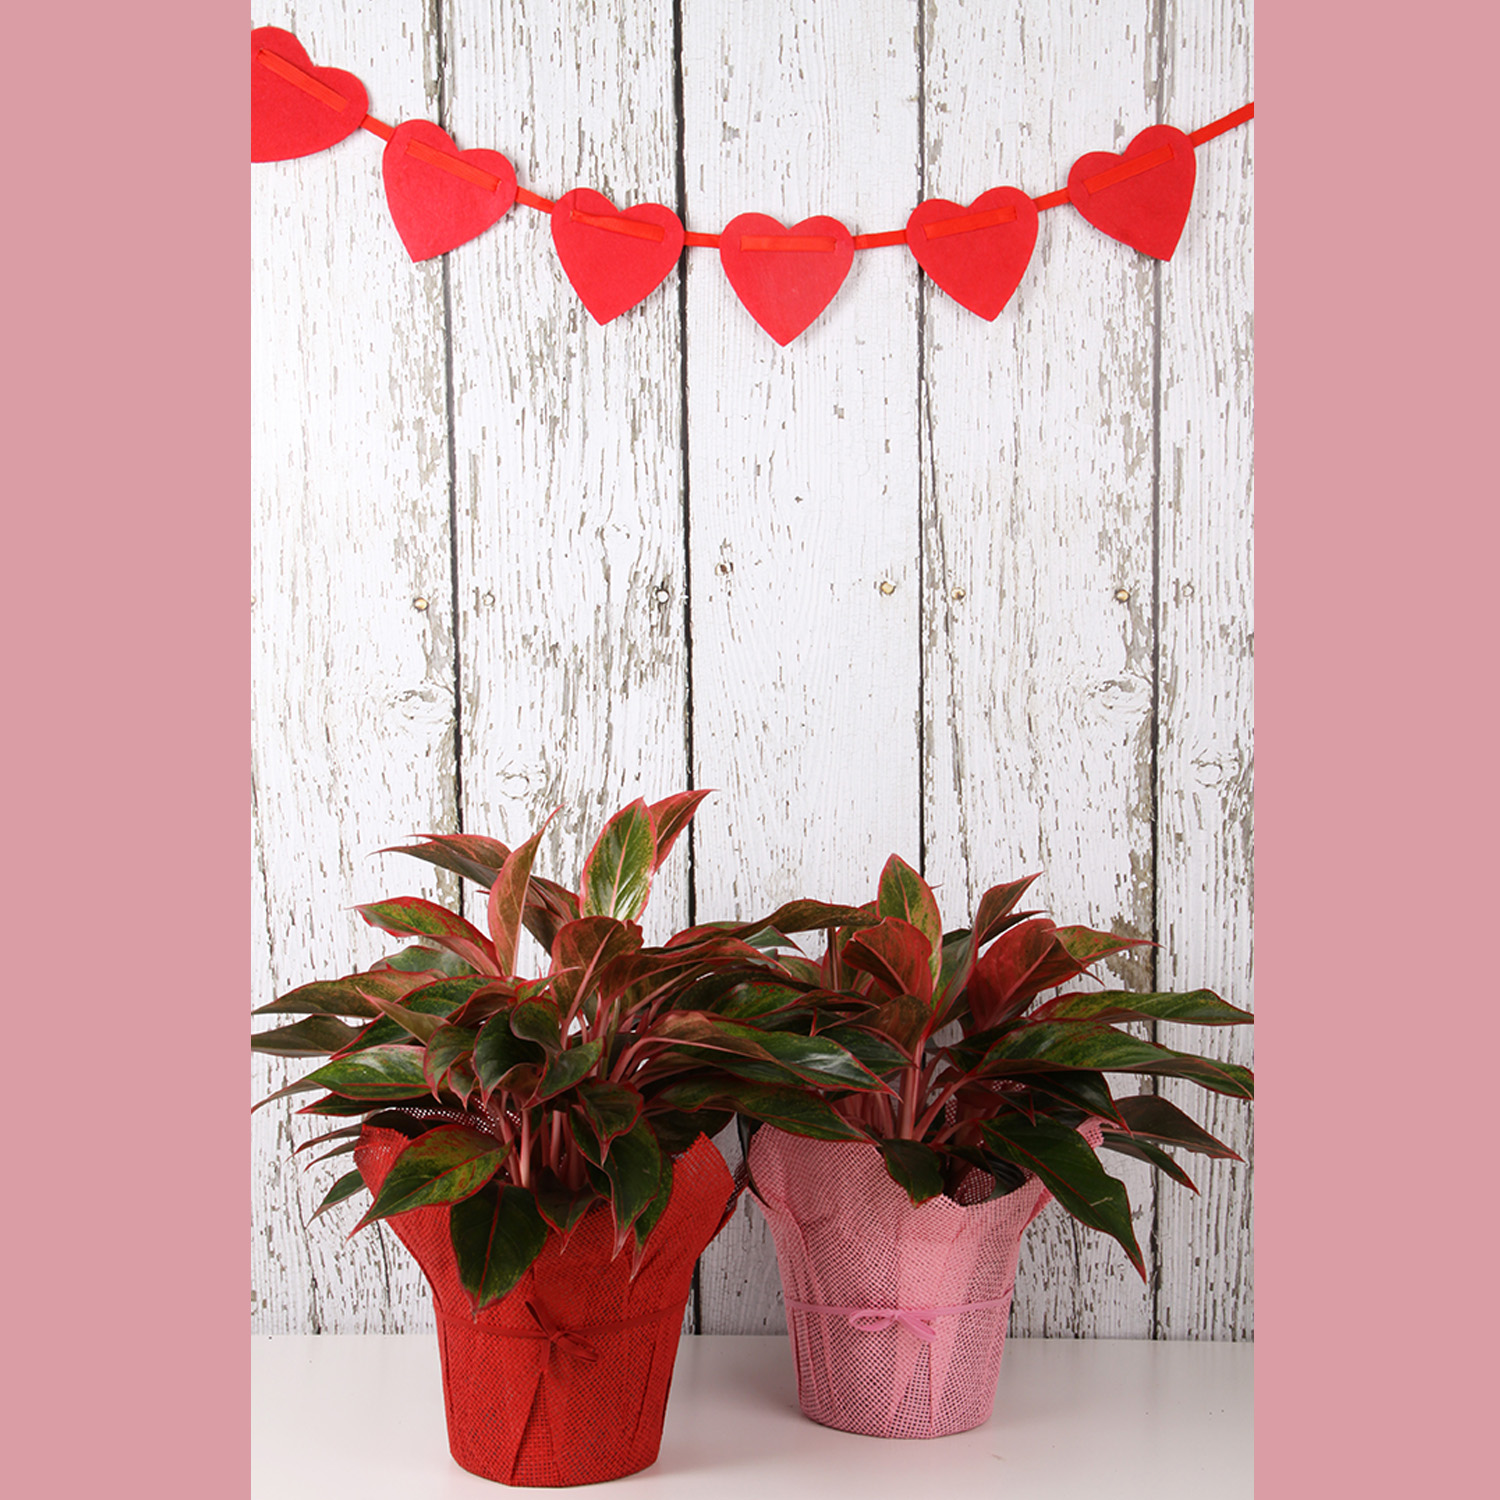 A Red Aglaonema with its bold colors and showy leaves is perfect for someone daring and knows how to dazzle.